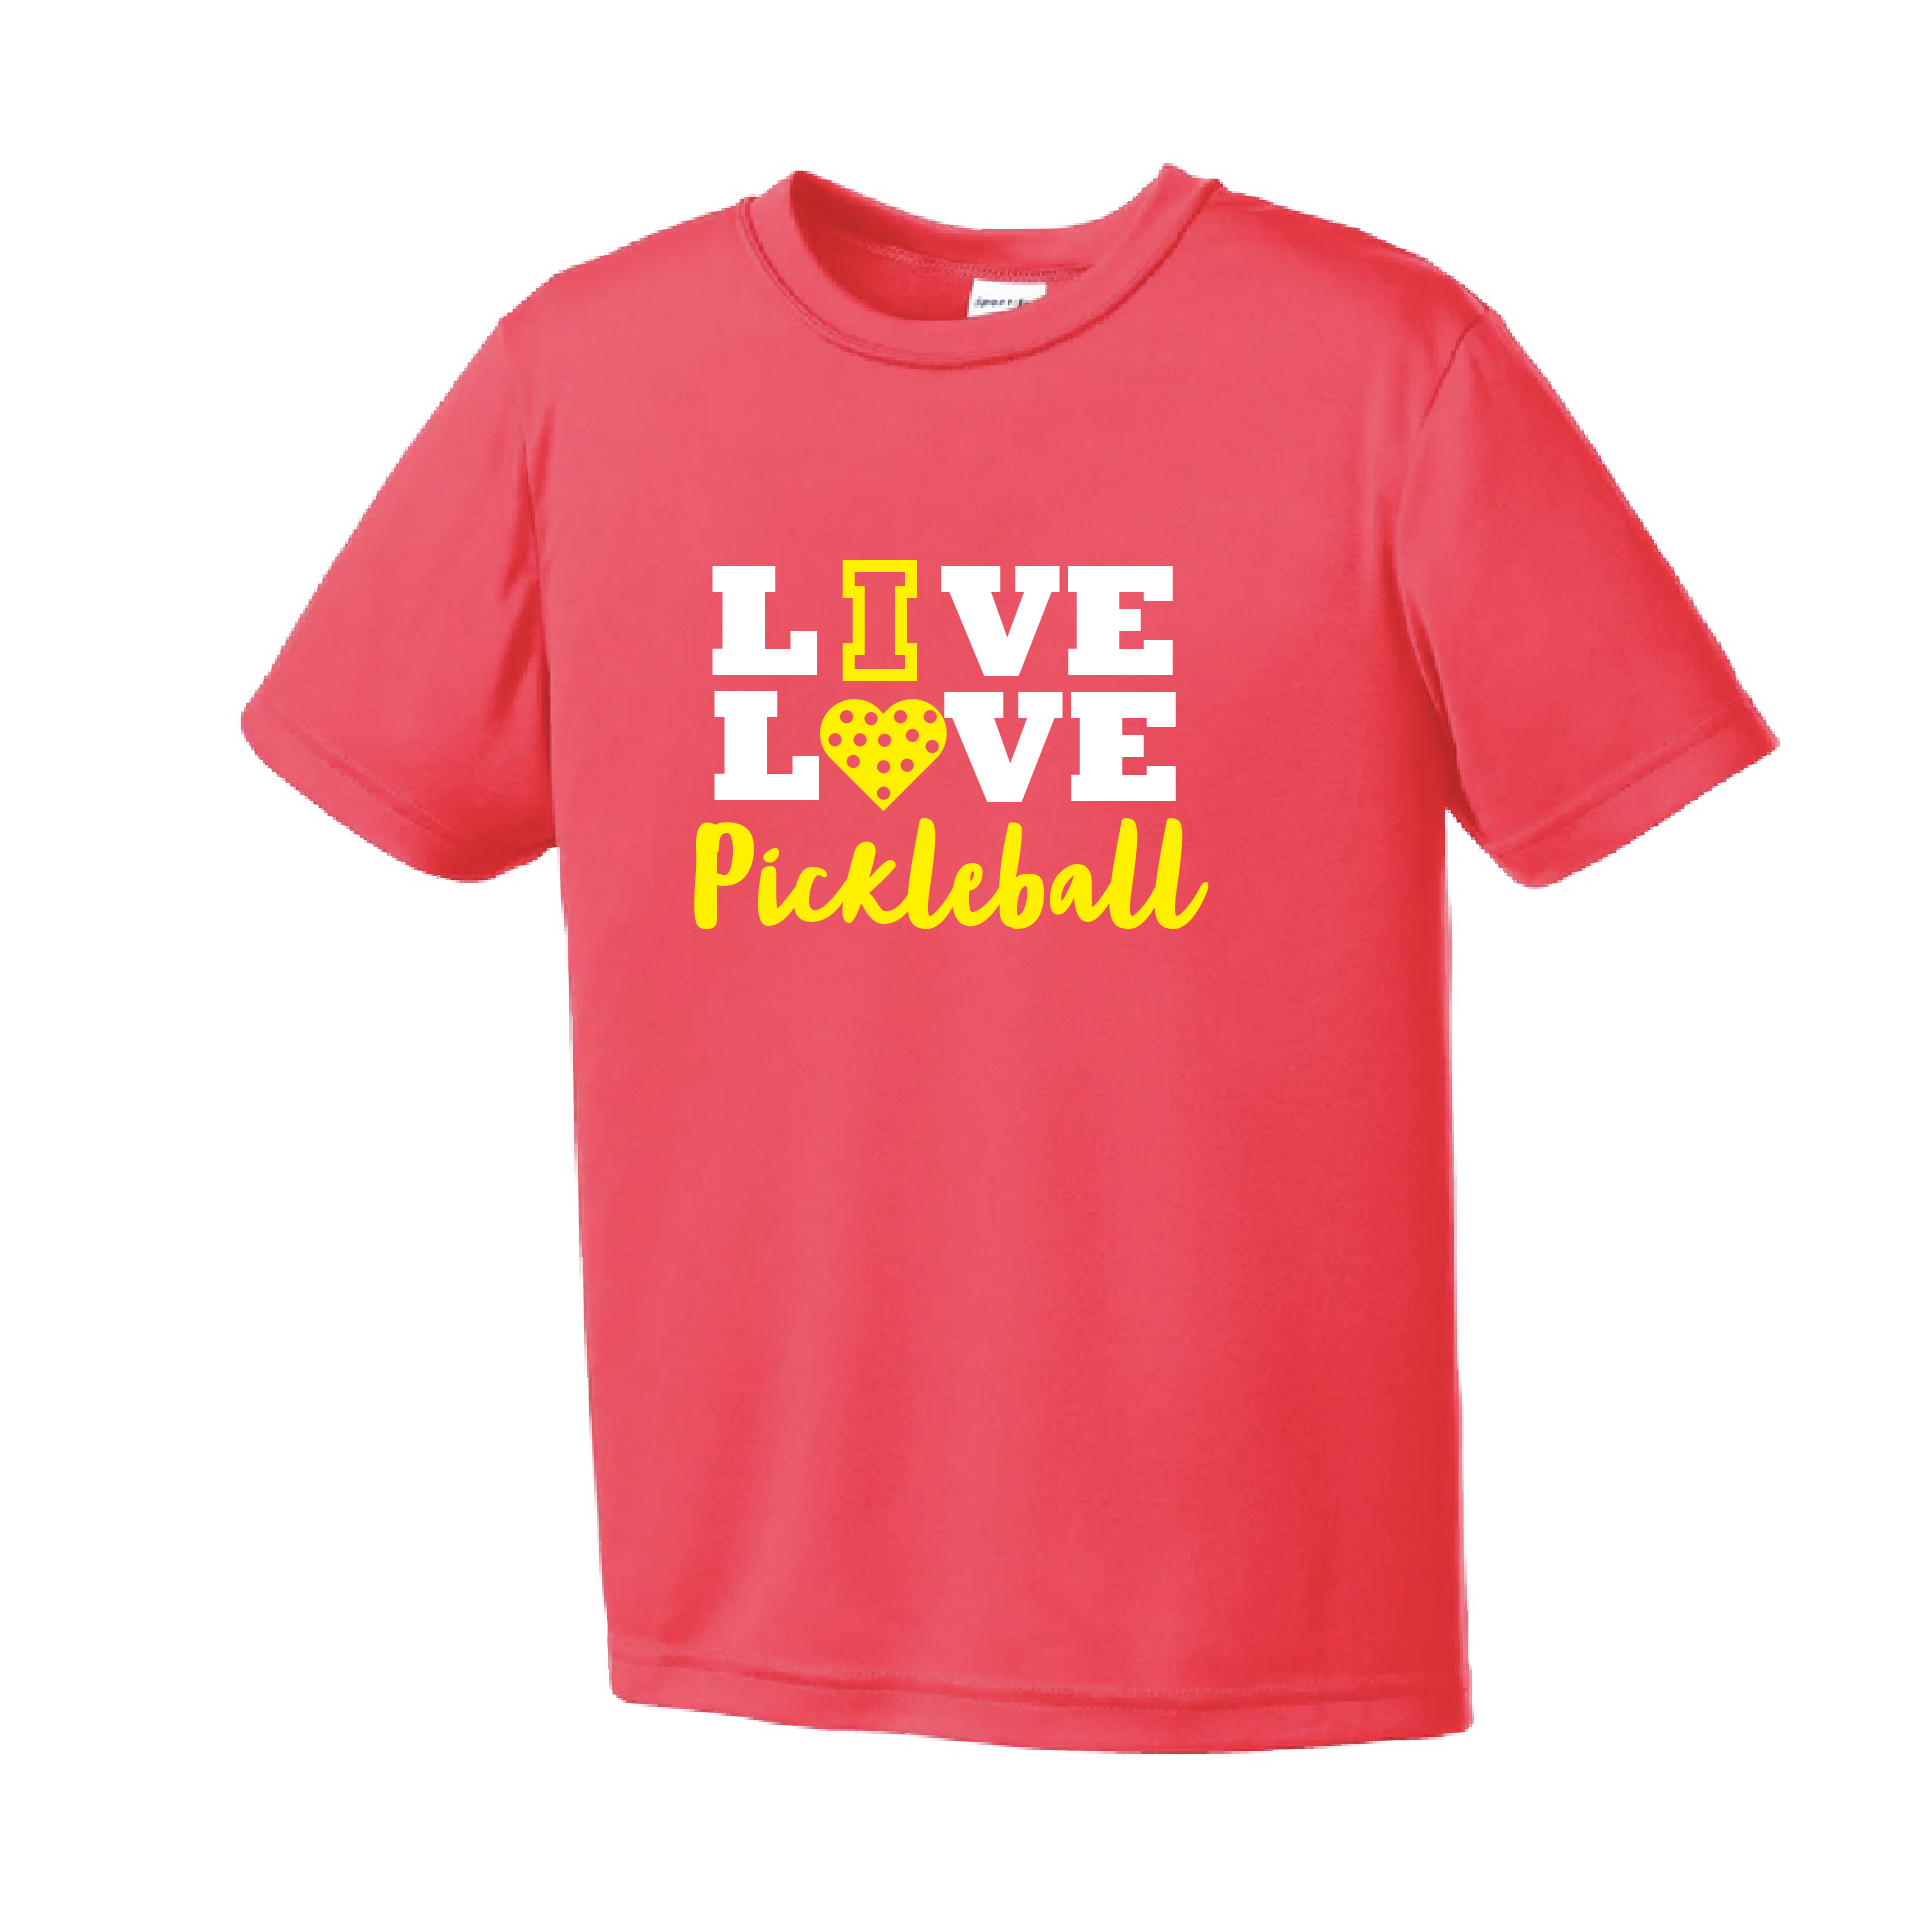 Pickleball Design: Live Love Pickleball  Youth Style: Short Sleeve  Shirts are lightweight, roomy and highly breathable. These moisture-wicking shirts are designed for athletic performance. They feature PosiCharge technology to lock in color and prevent logos from fading. Removable tag and set-in sleeves for comfort.